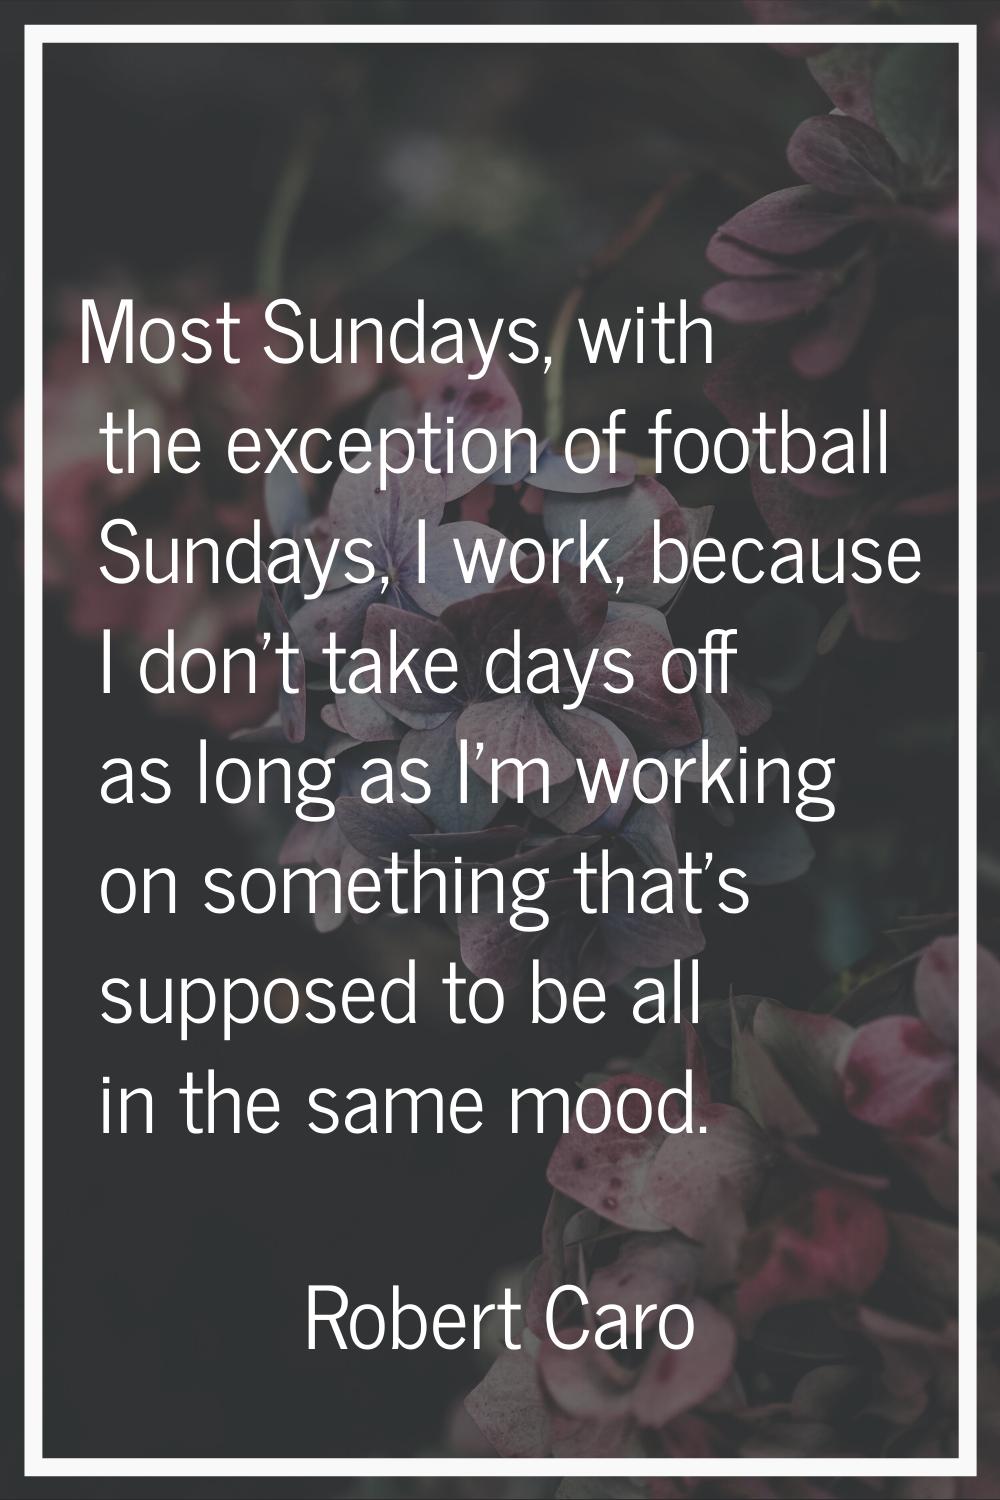 Most Sundays, with the exception of football Sundays, I work, because I don't take days off as long